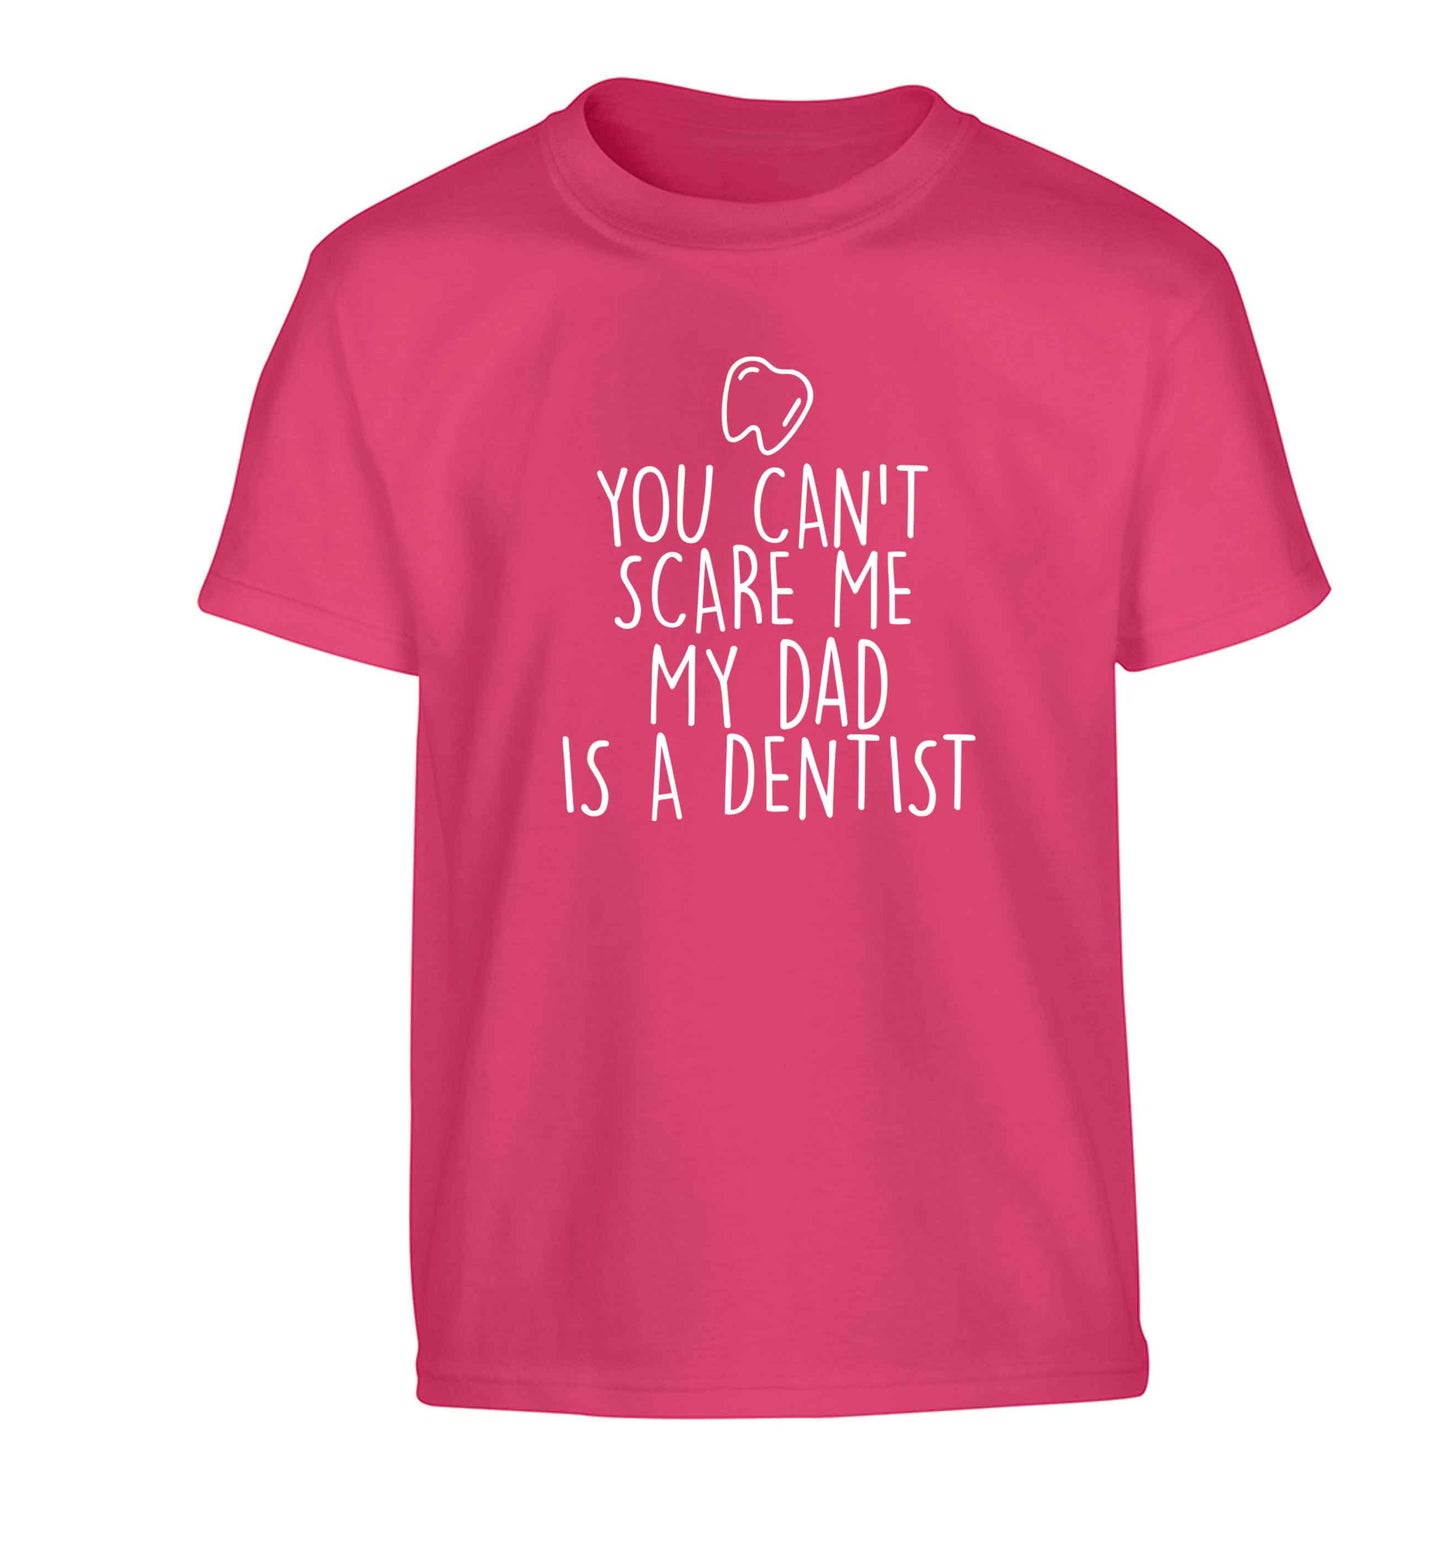 You can't scare me my dad is a dentist Children's pink Tshirt 12-13 Years